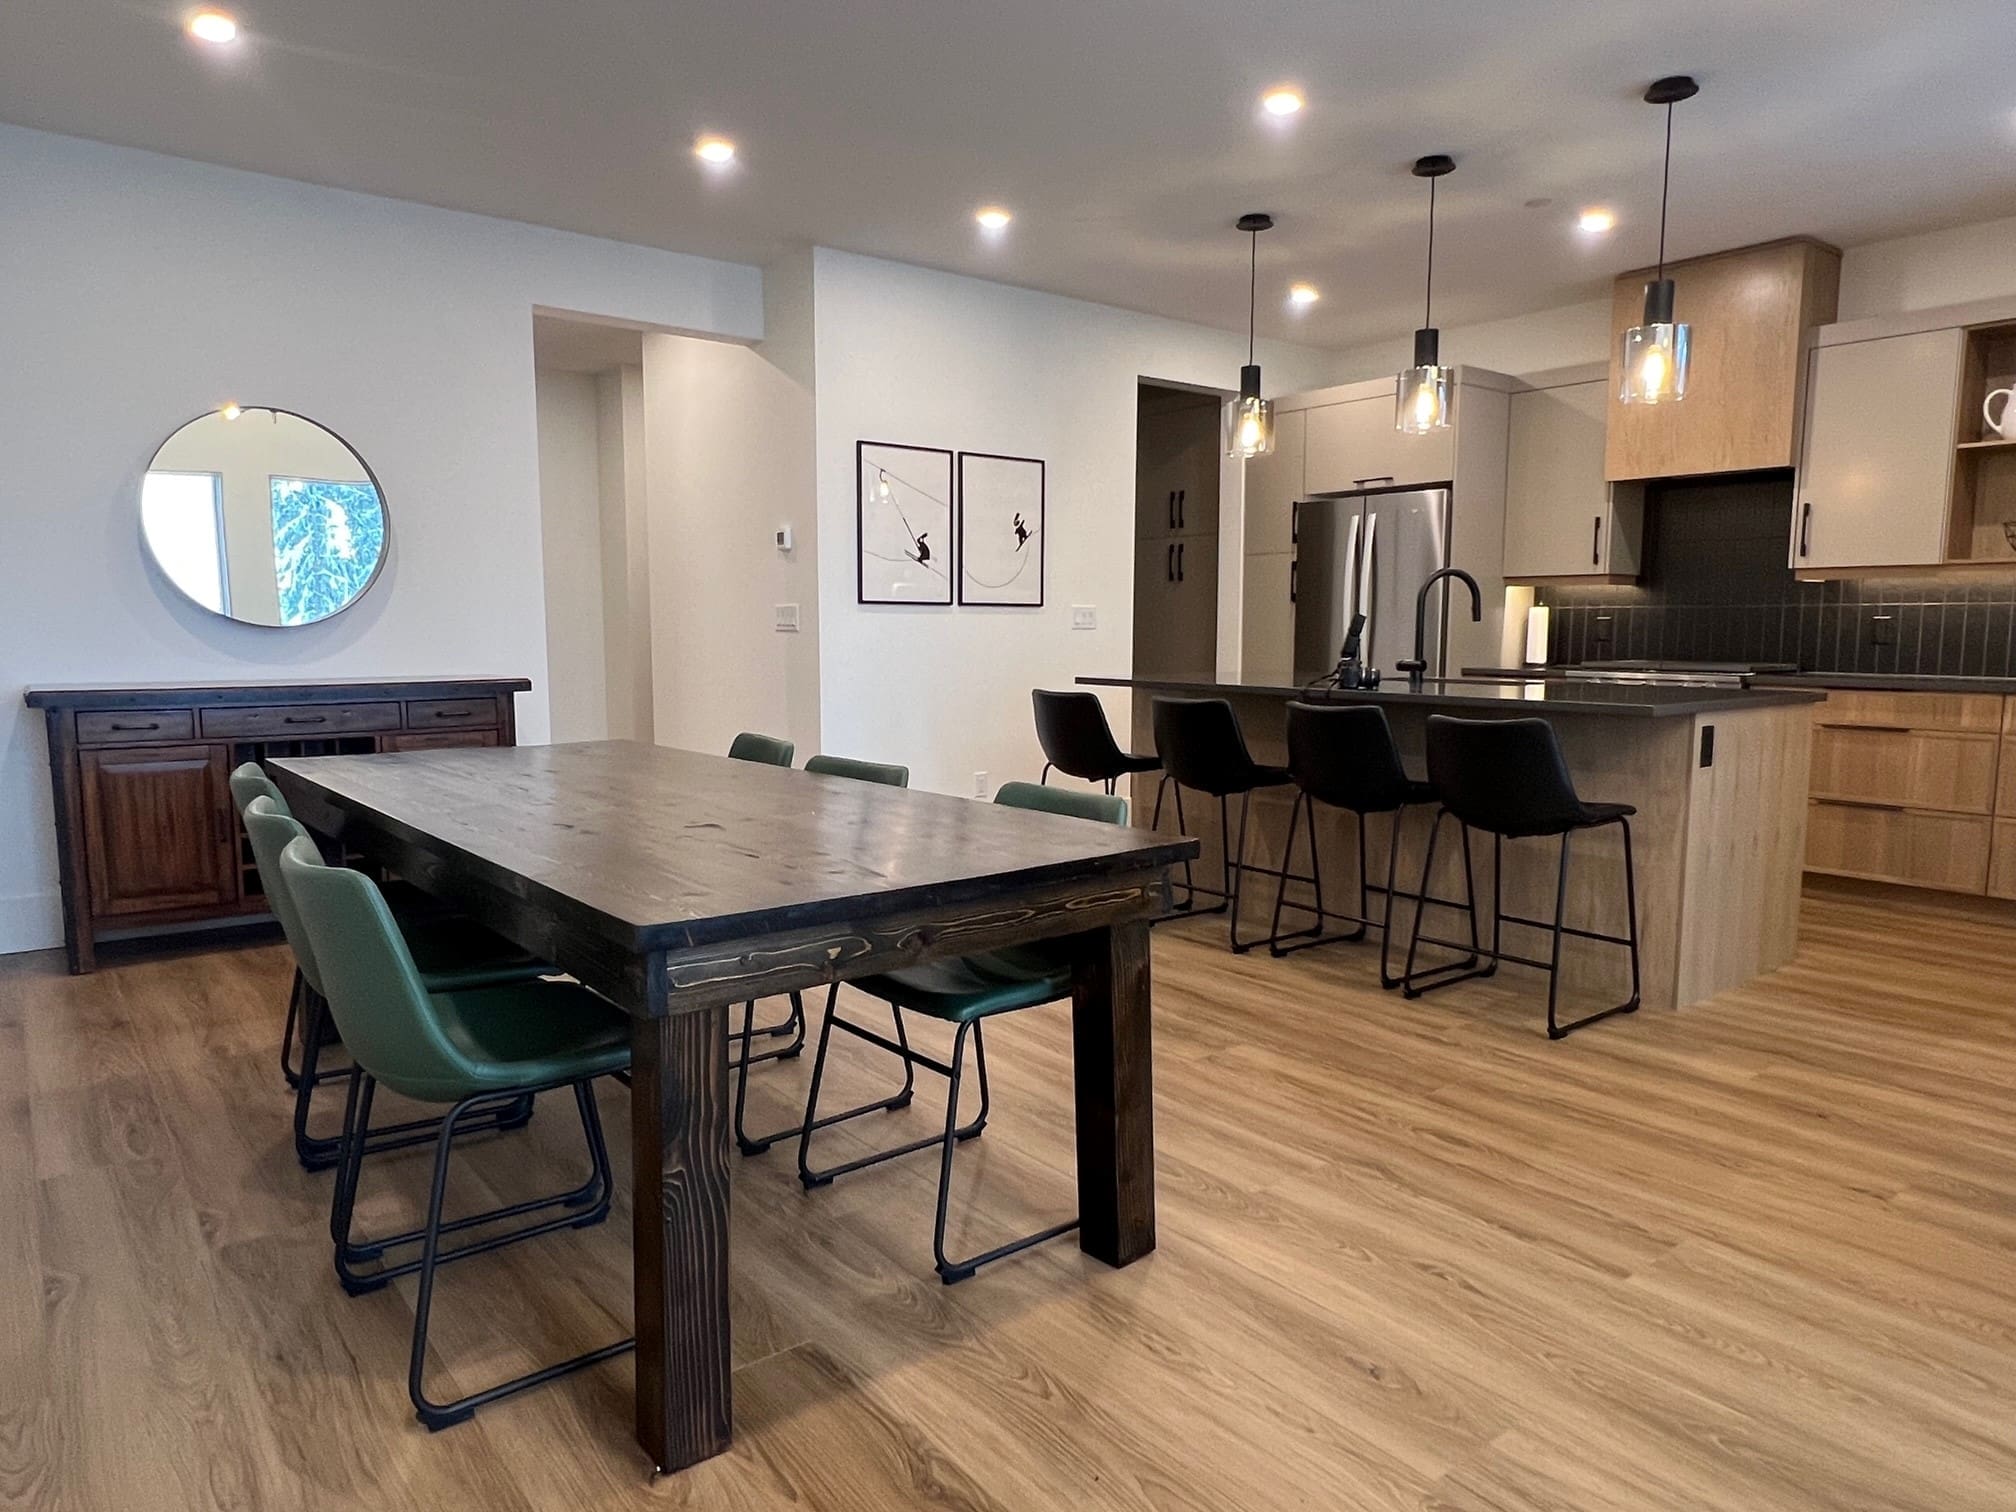 This brand new modern duplex with large dining table and area, den for the kids, private hot tub, laundry, BBQ and amazing ski-in and out access from behind the house.